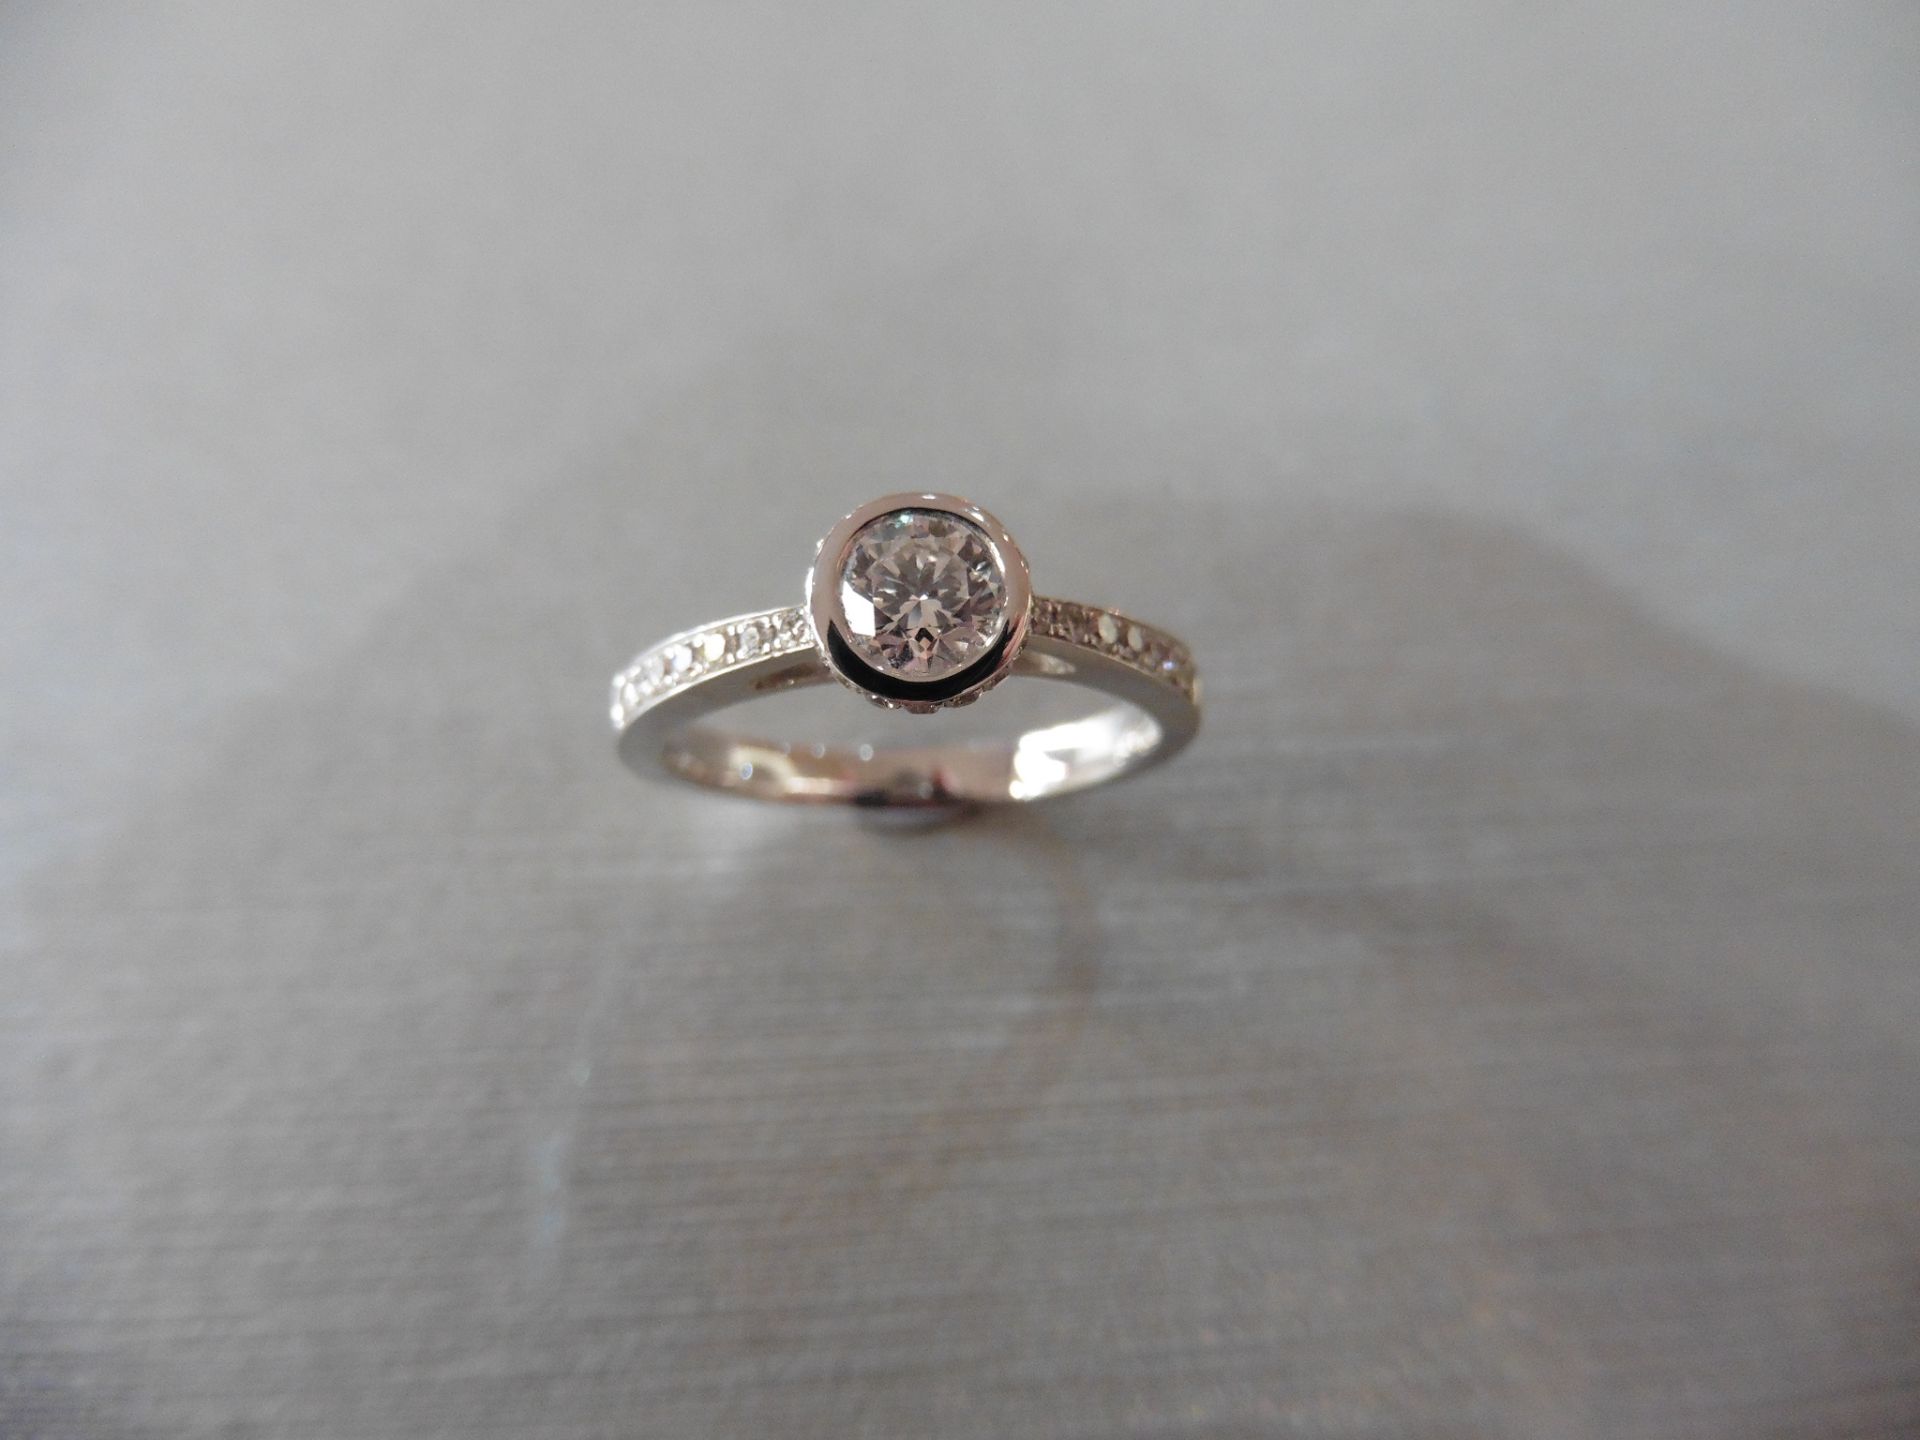 0.41ct 18ct white gold diamond set solitaire ring with a Brilliant cut diamond secured in a rub over - Image 4 of 5